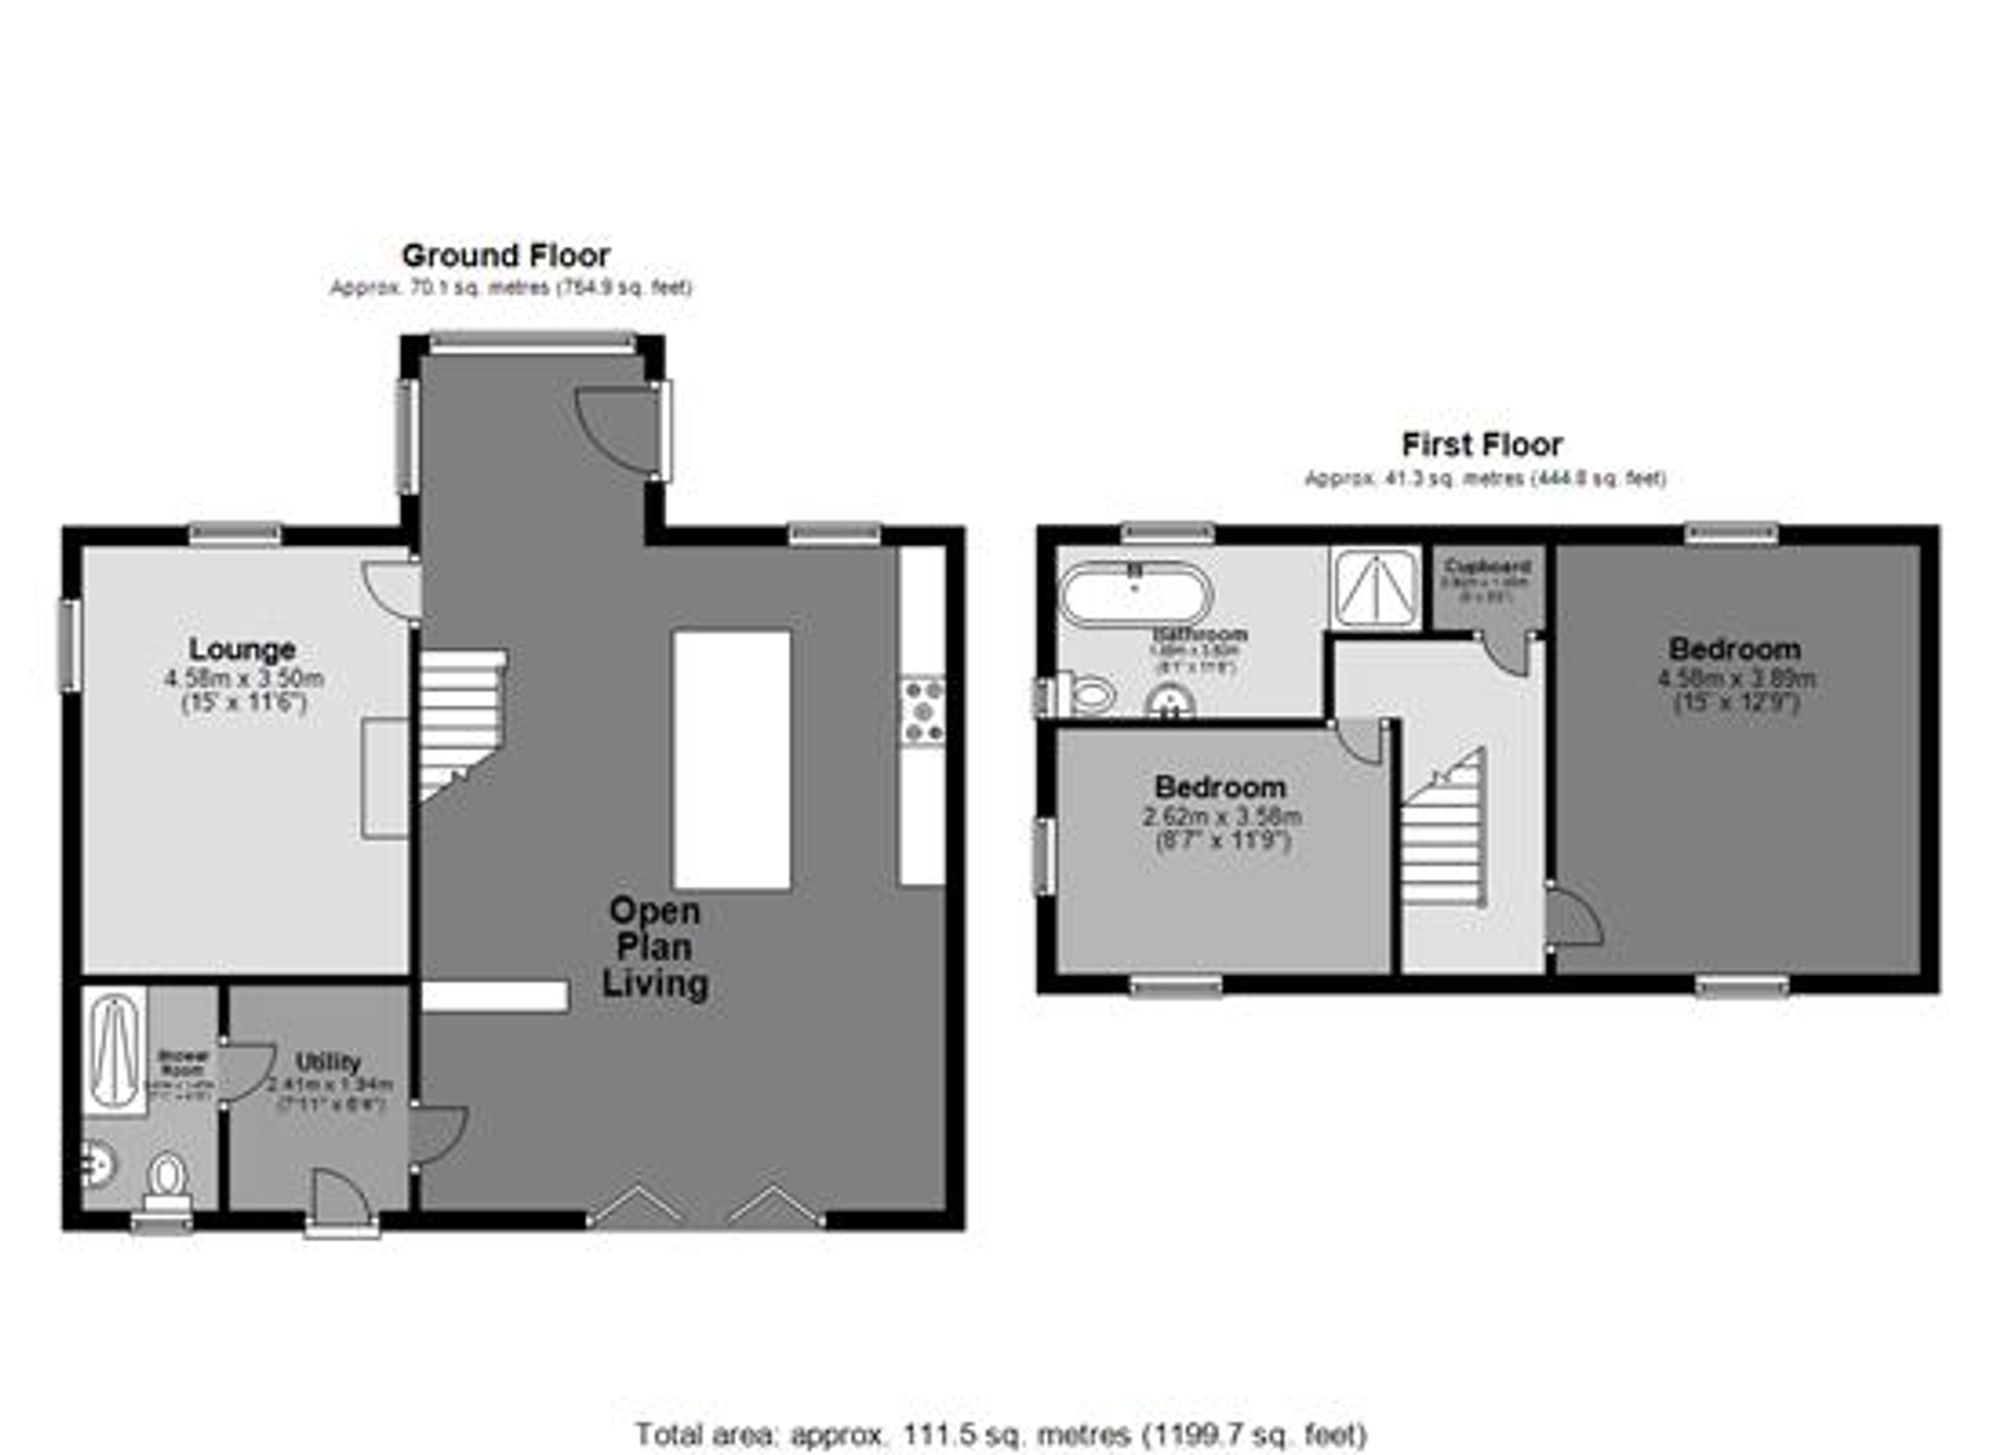 2 bed detached house to rent in Tedburn St. Mary, Exeter - Property floorplan